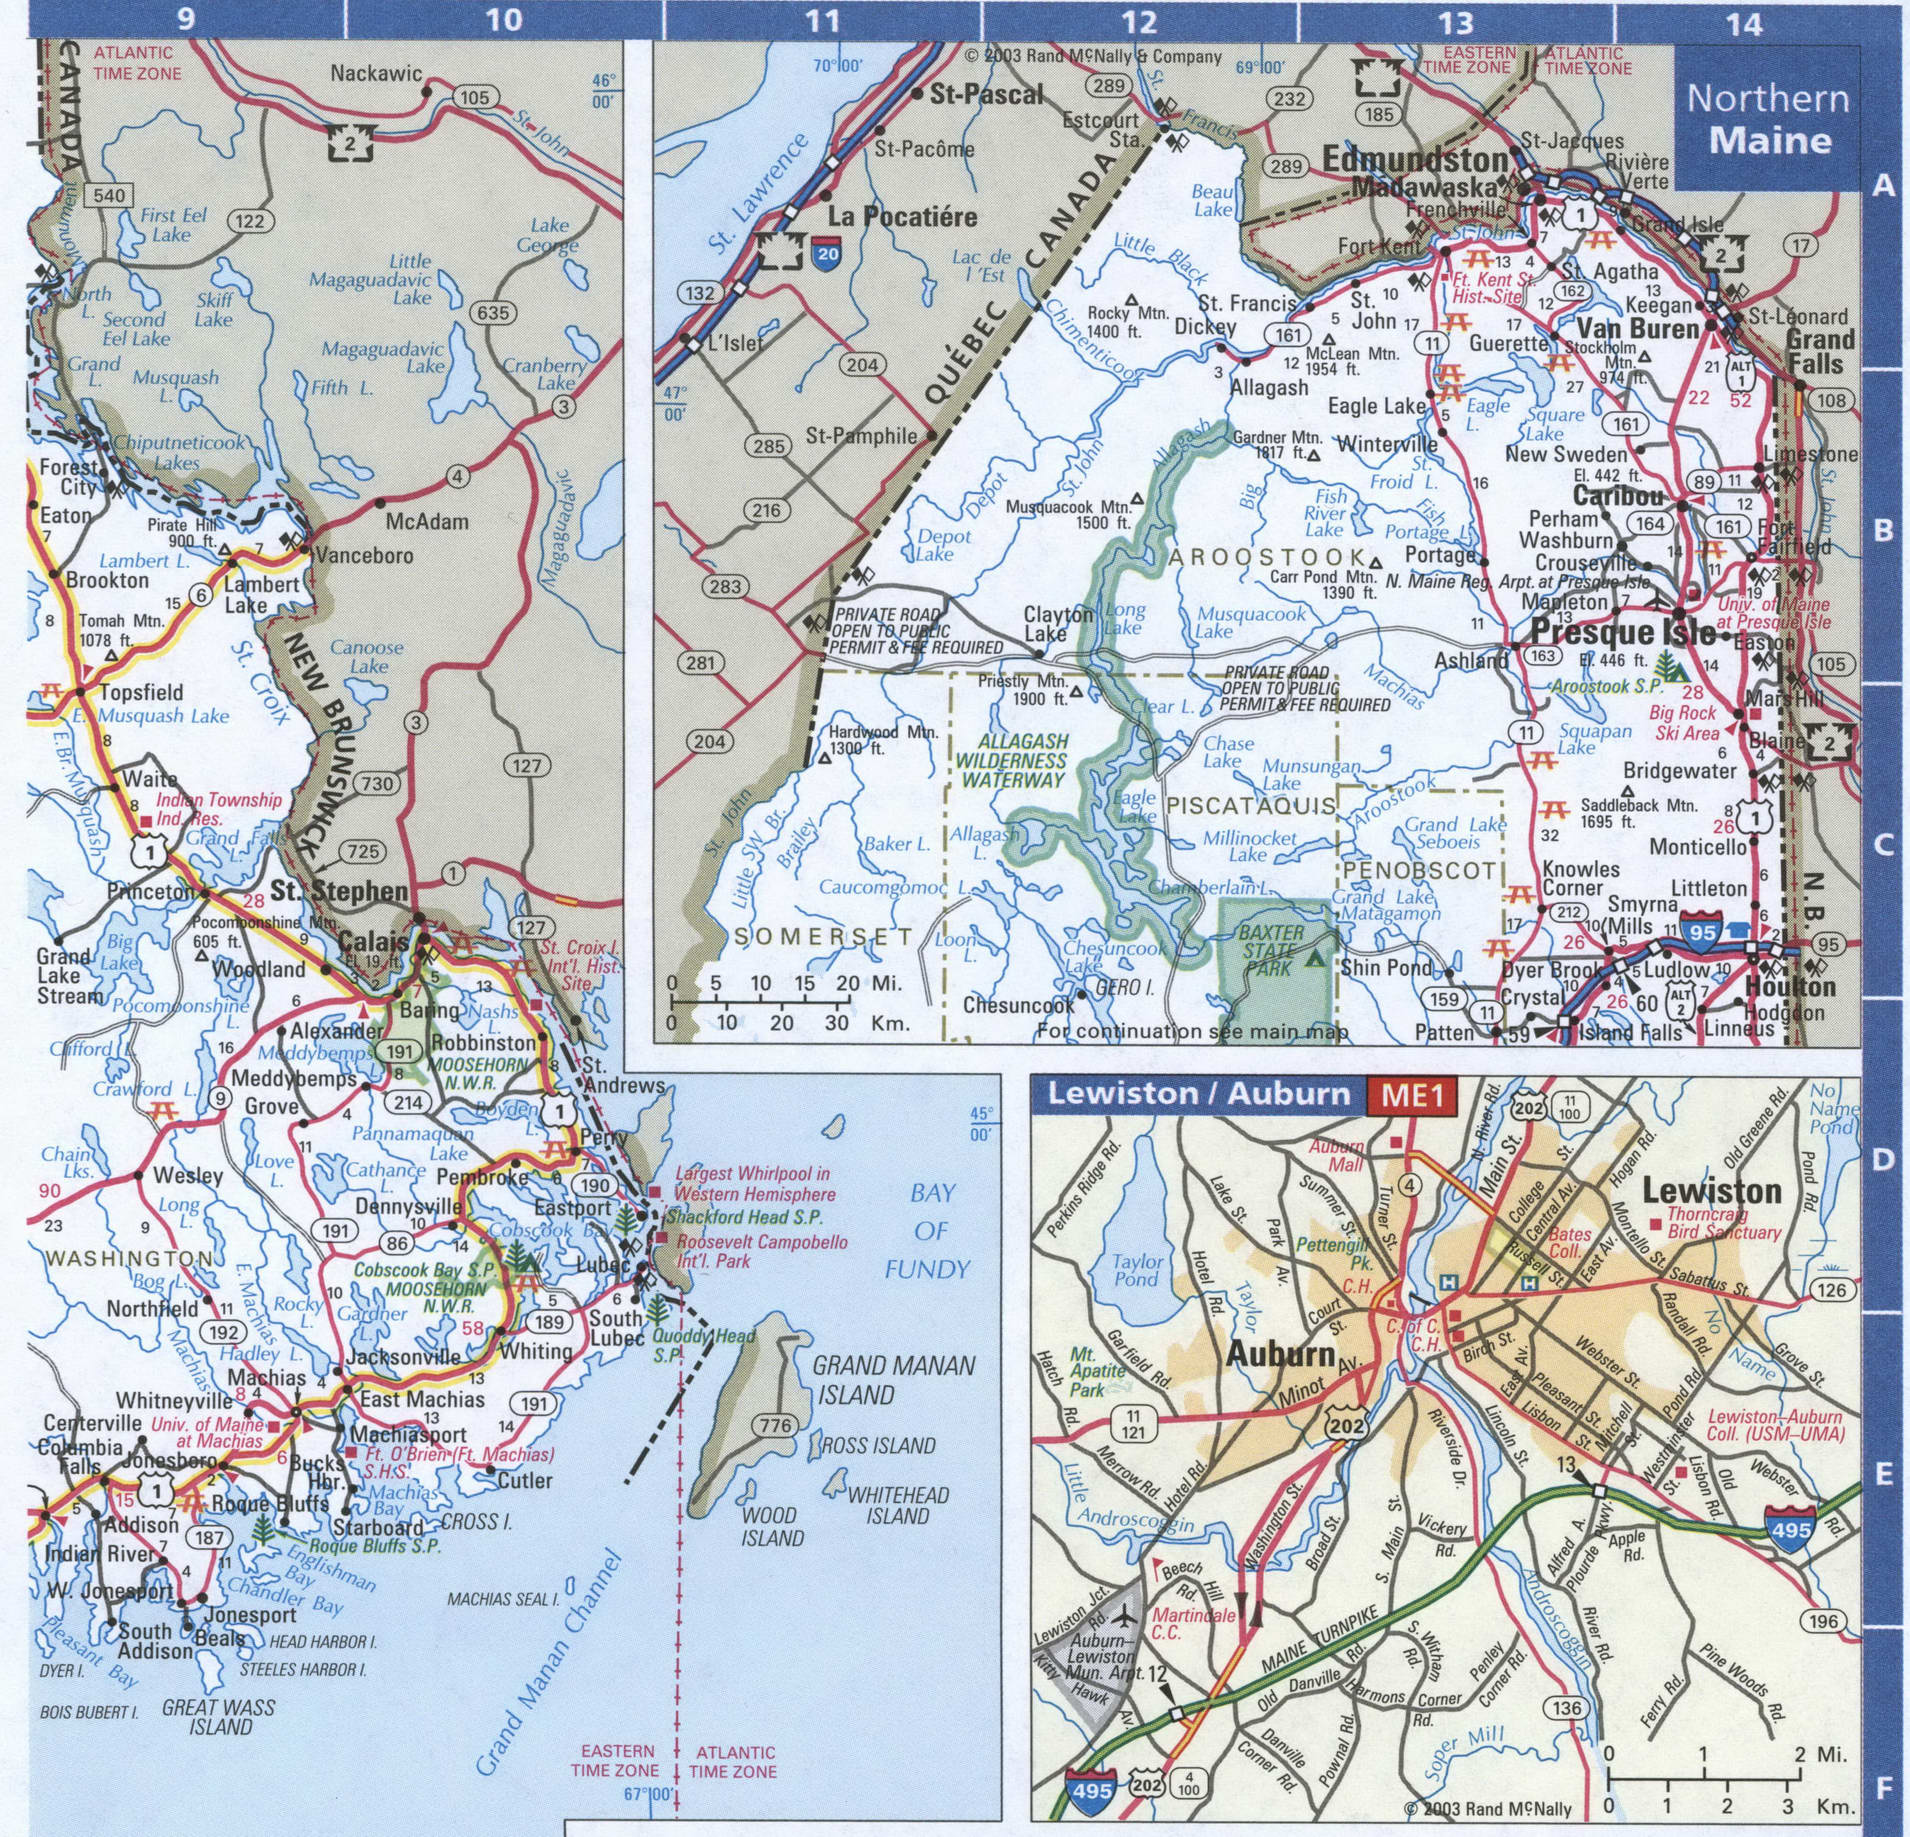 Eastern and Northern Maine map